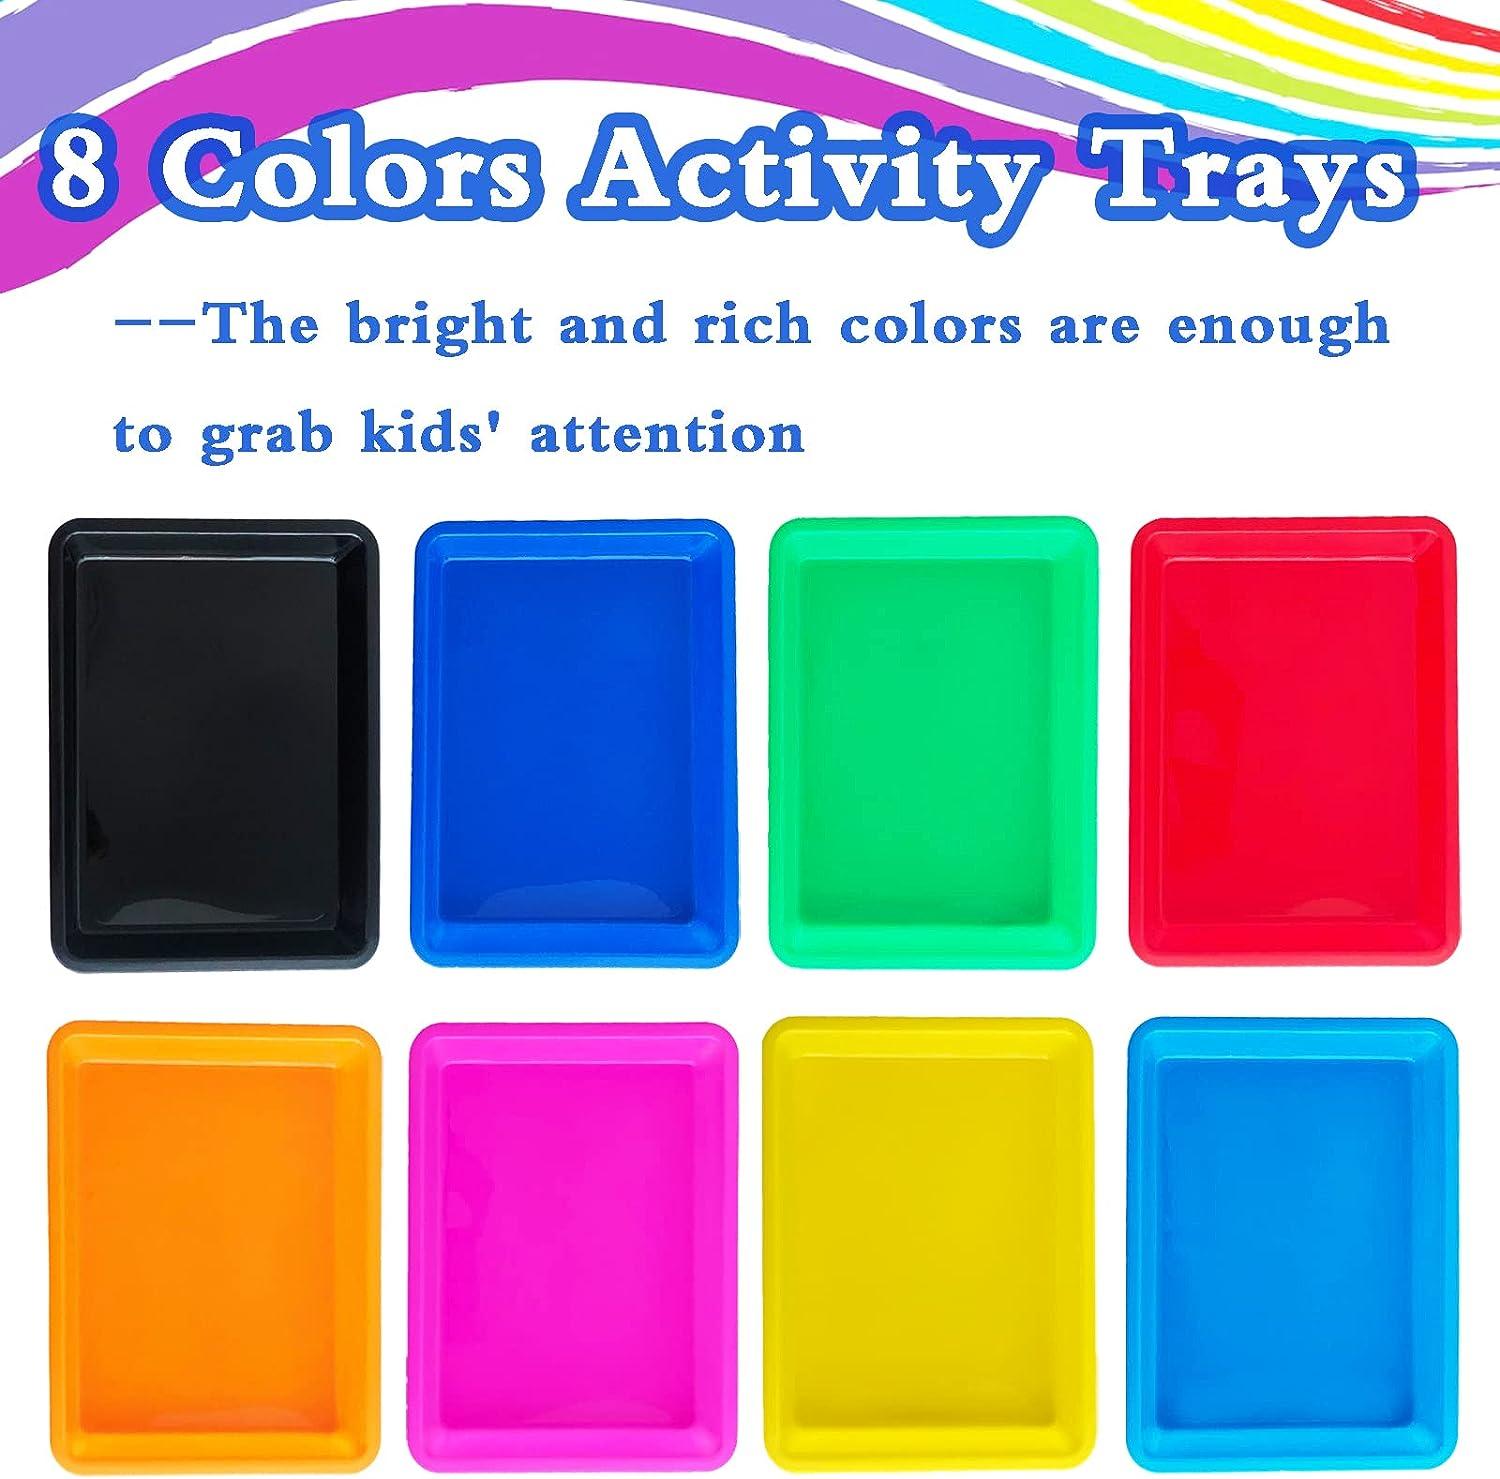 10 Pack Plastic Art Trays,8 Colors Activity Trays Sensory Tray,Sand Tray  Serving Trays,Art Trays for Kids,Crafts Organizer,DIY  Projects,Painting,Beads,Home,School